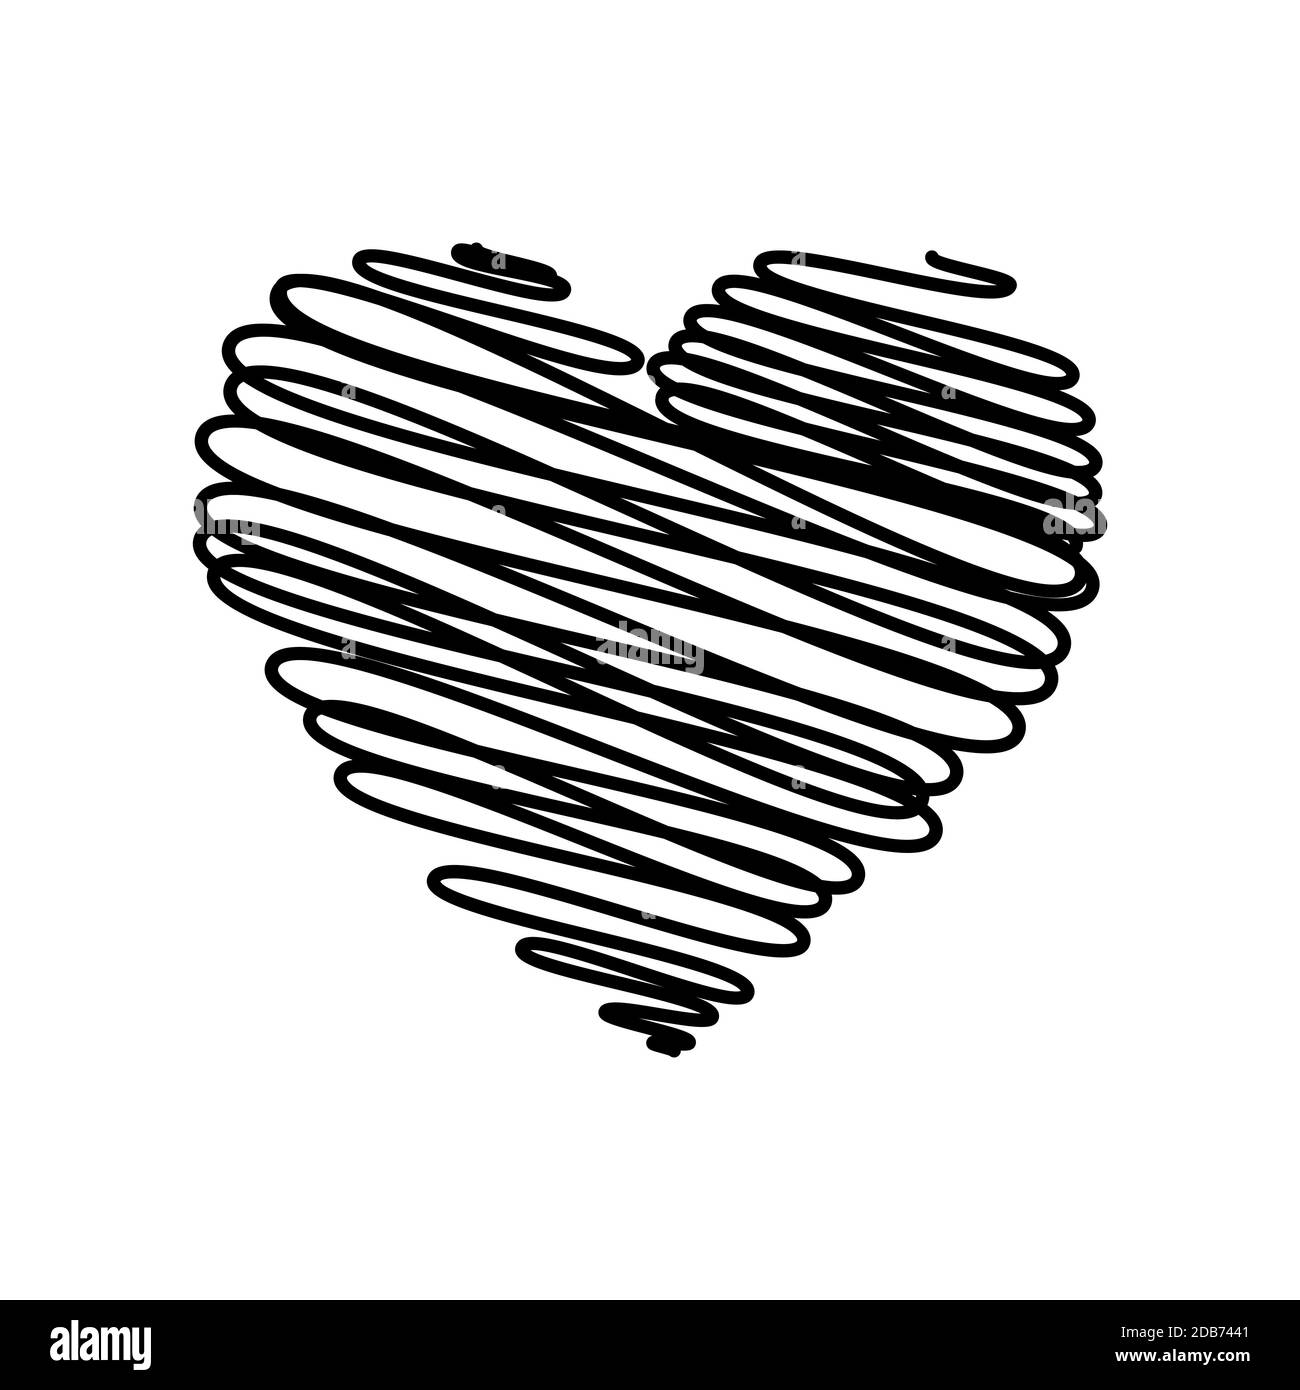 Heart - pencil scribble sketch drawing in black on white background. Valentine card doodle concept. Vector illustration. Stock Vector